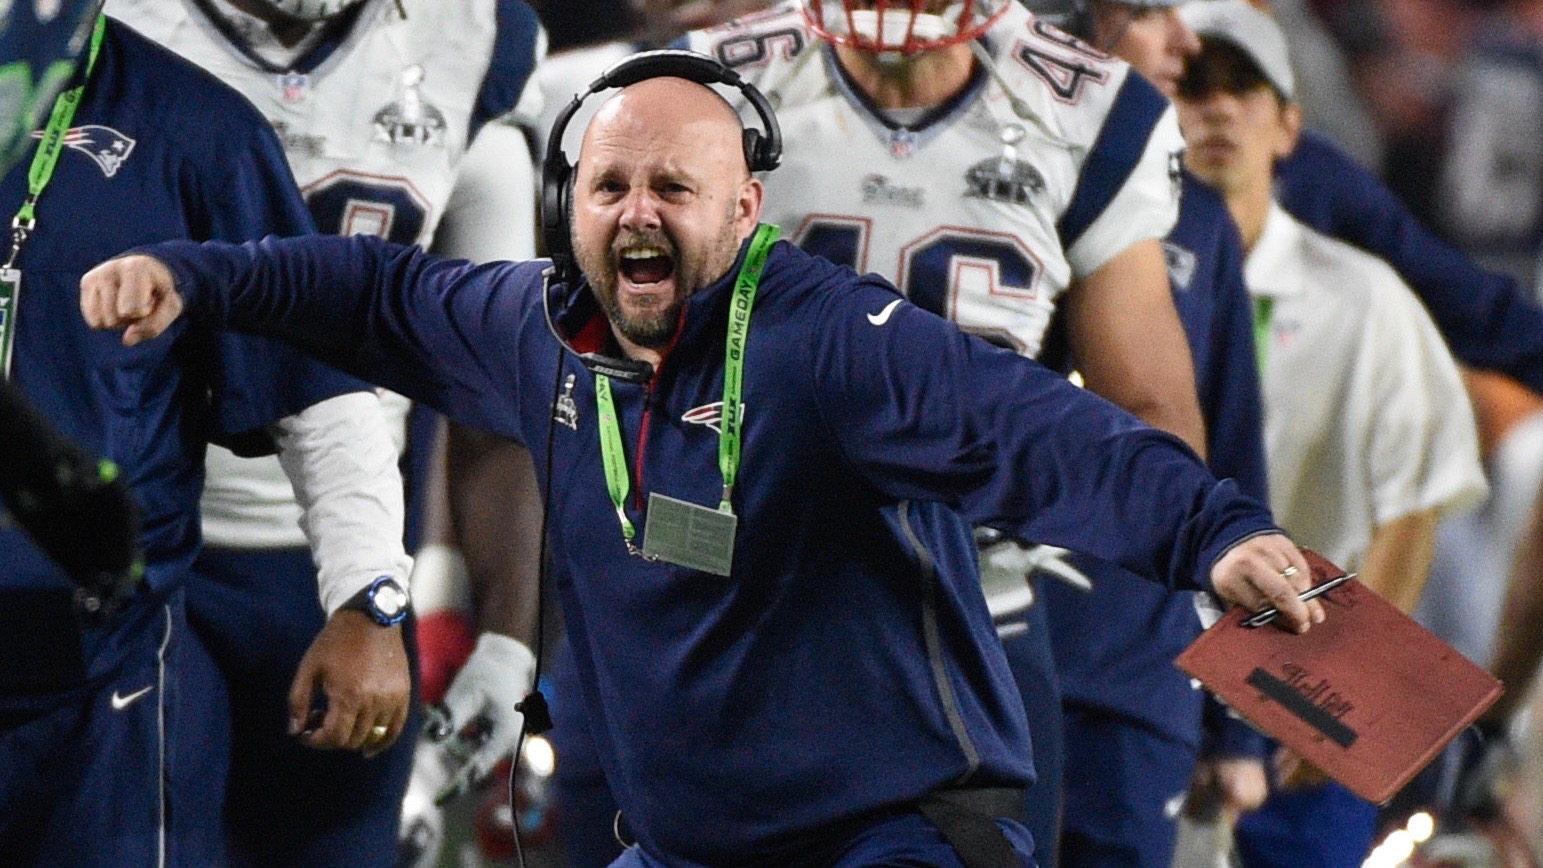 Feb 1, 2015; Glendale, AZ, USA; New England Patriots tight ends coach Brian Daboll during Super Bowl XLIX against the Seattle Seahawks at University of Phoenix Stadium. The Patriots defeated the Seahawks 28-24. Mandatory Credit: Kyle Terada-USA TODAY Sports